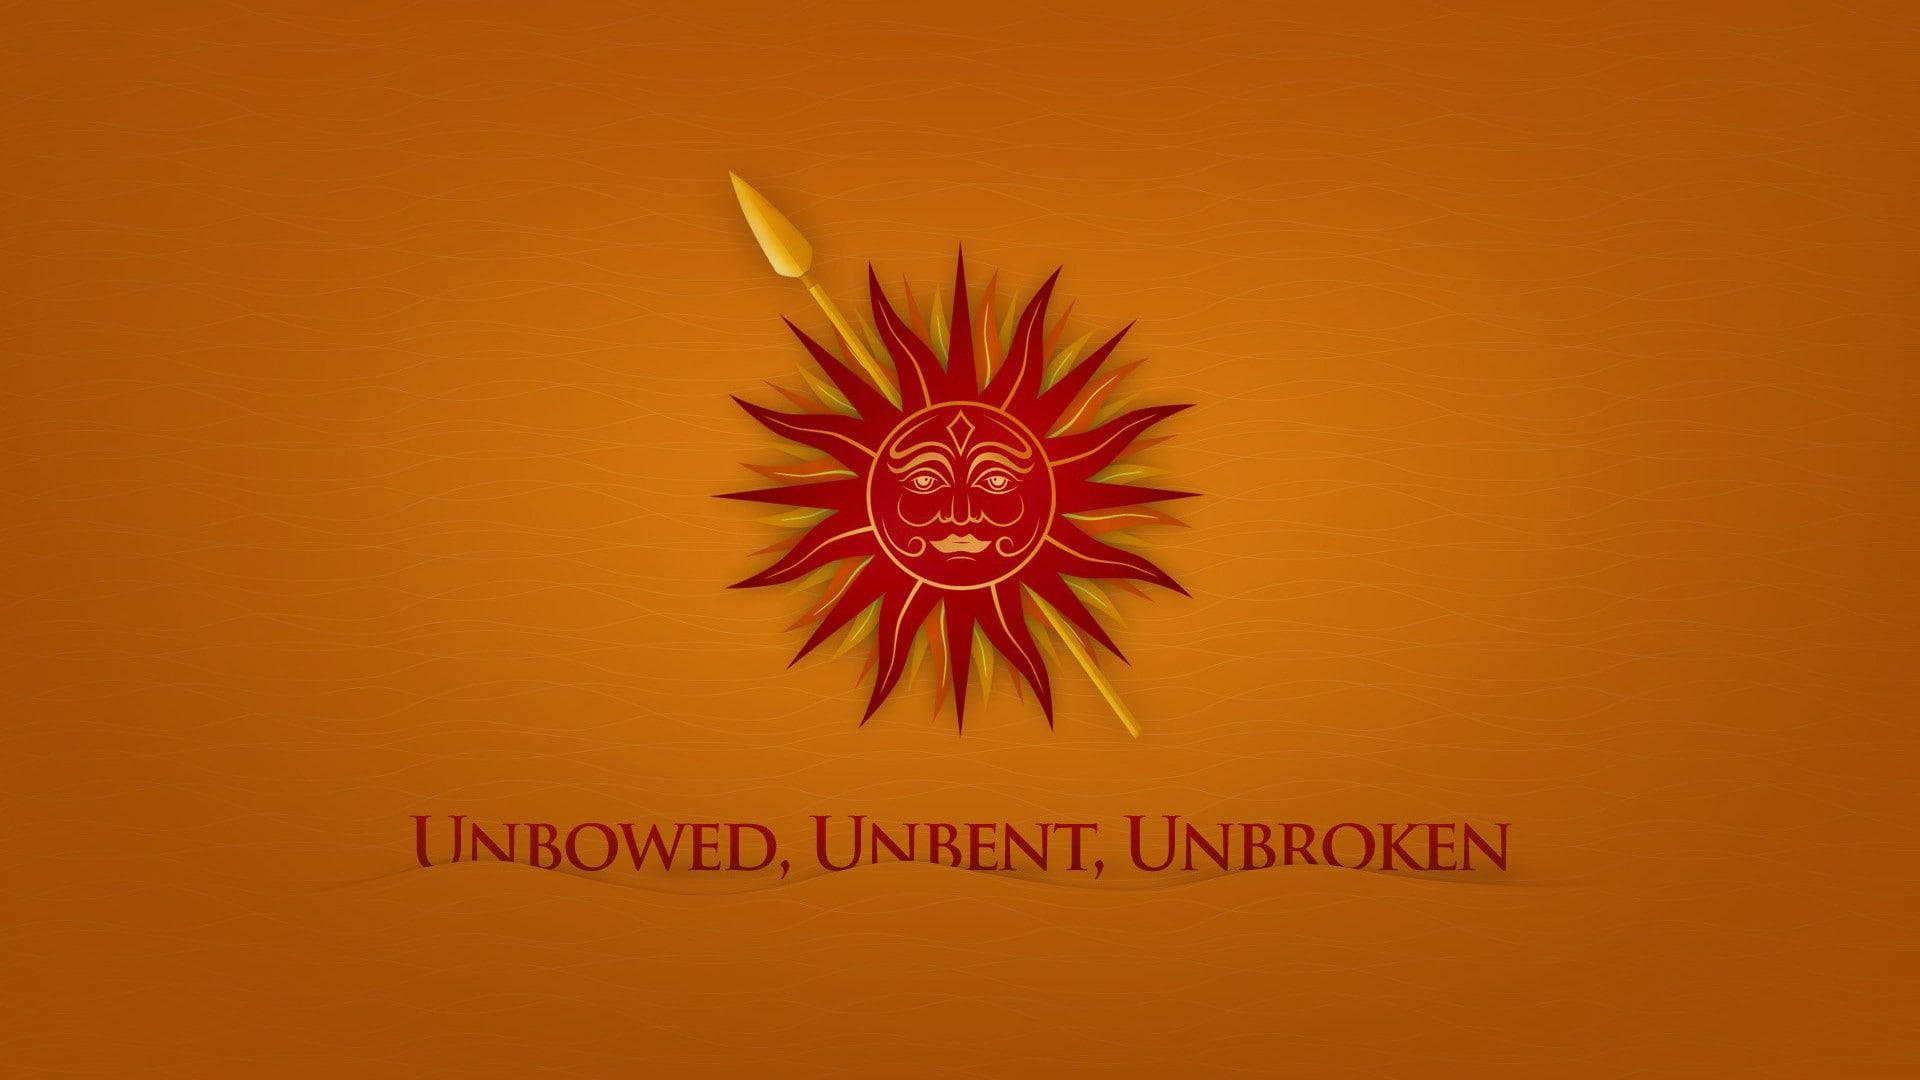 game of thrones sigils house martell, text, orange color, communication